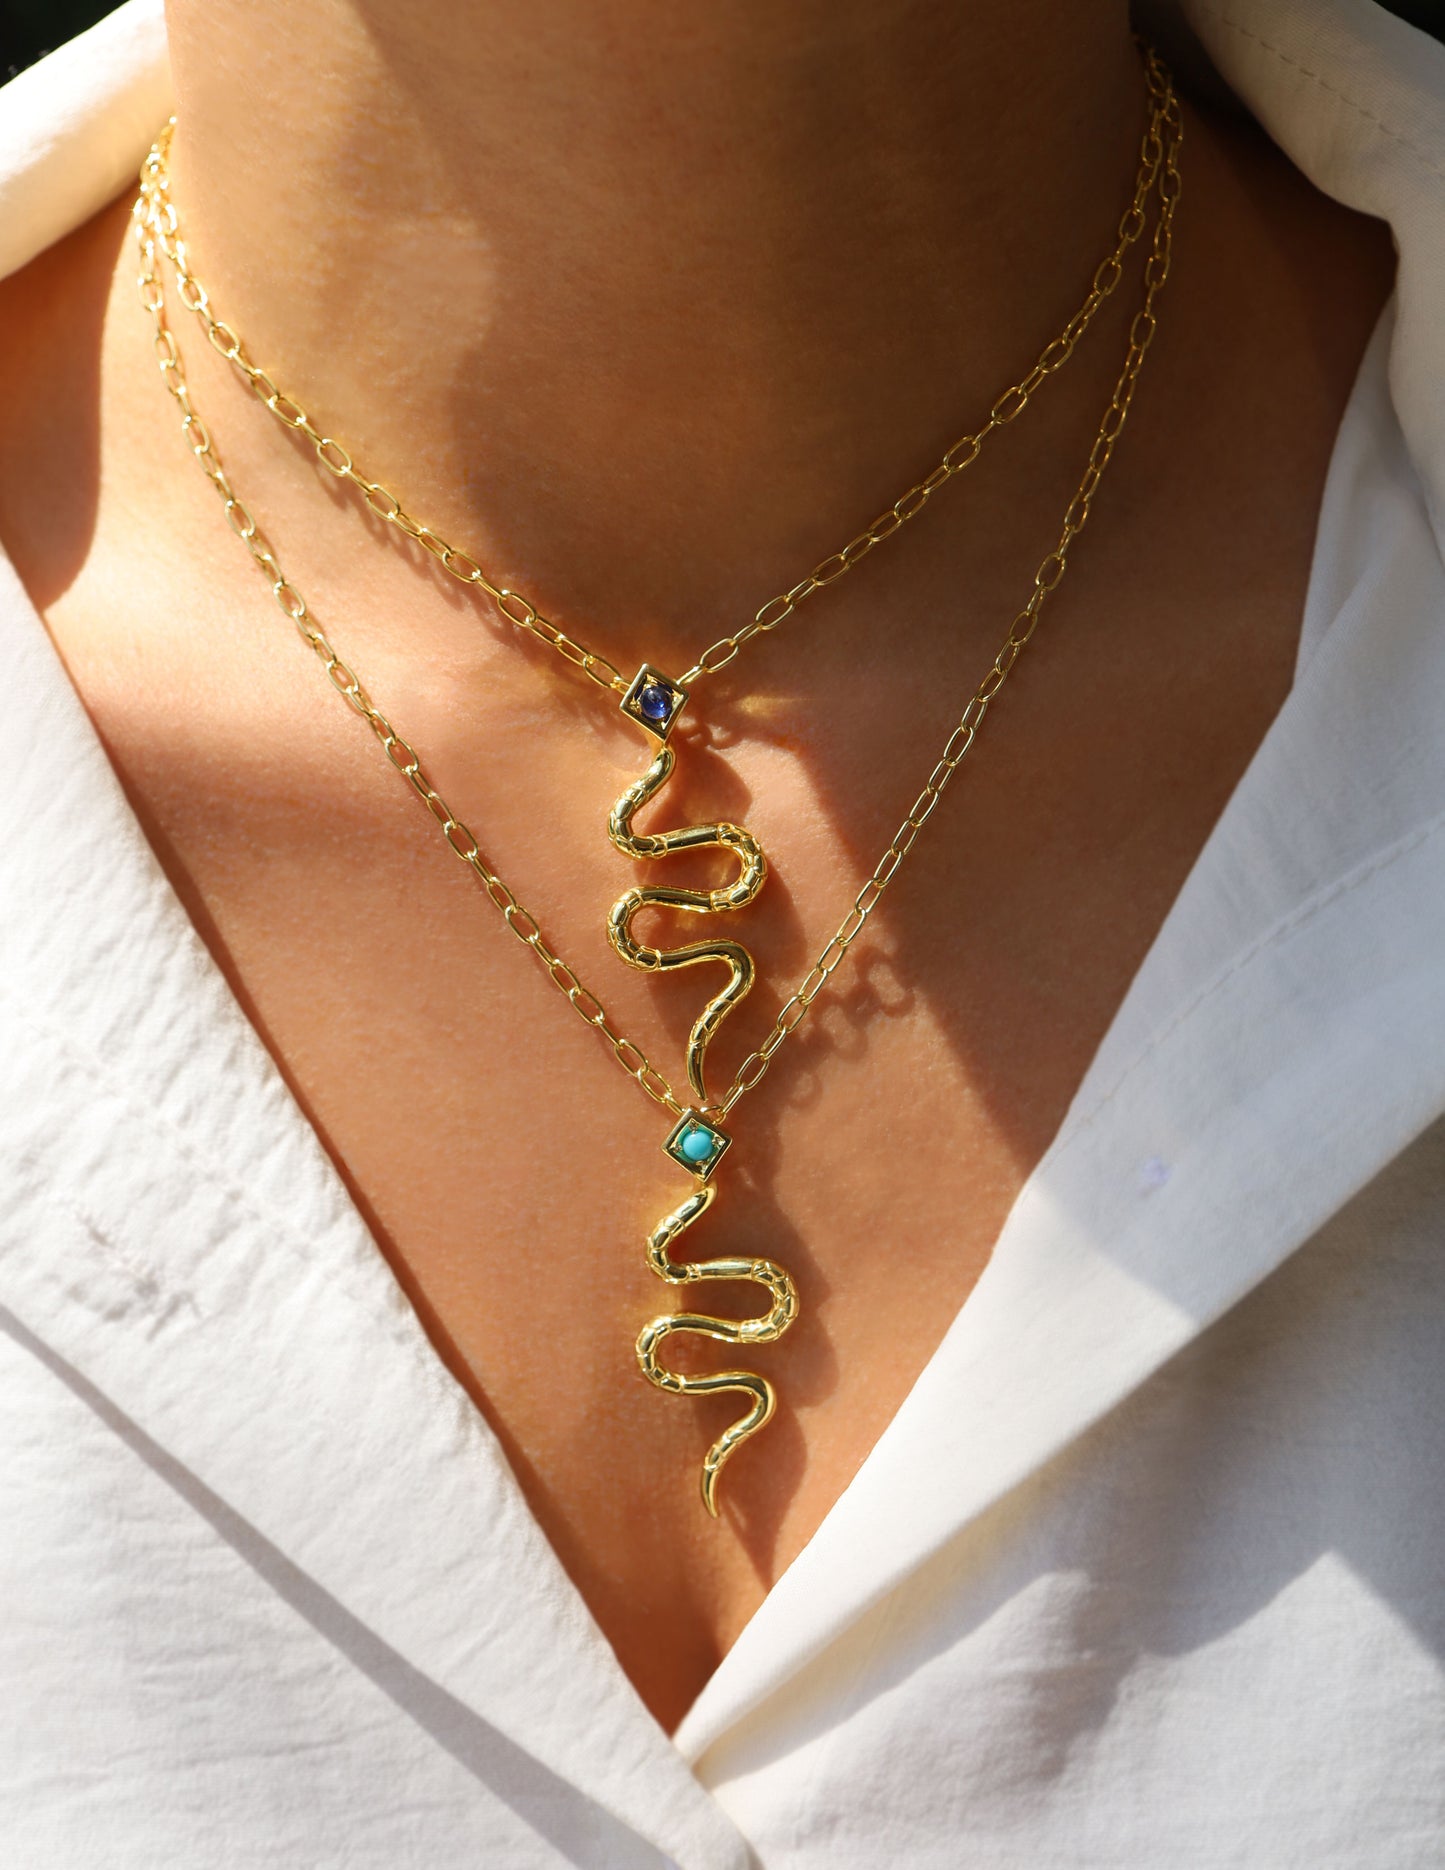 Serpentine 925 Silver Snake Necklace with Blue Sapphire Cabouchon